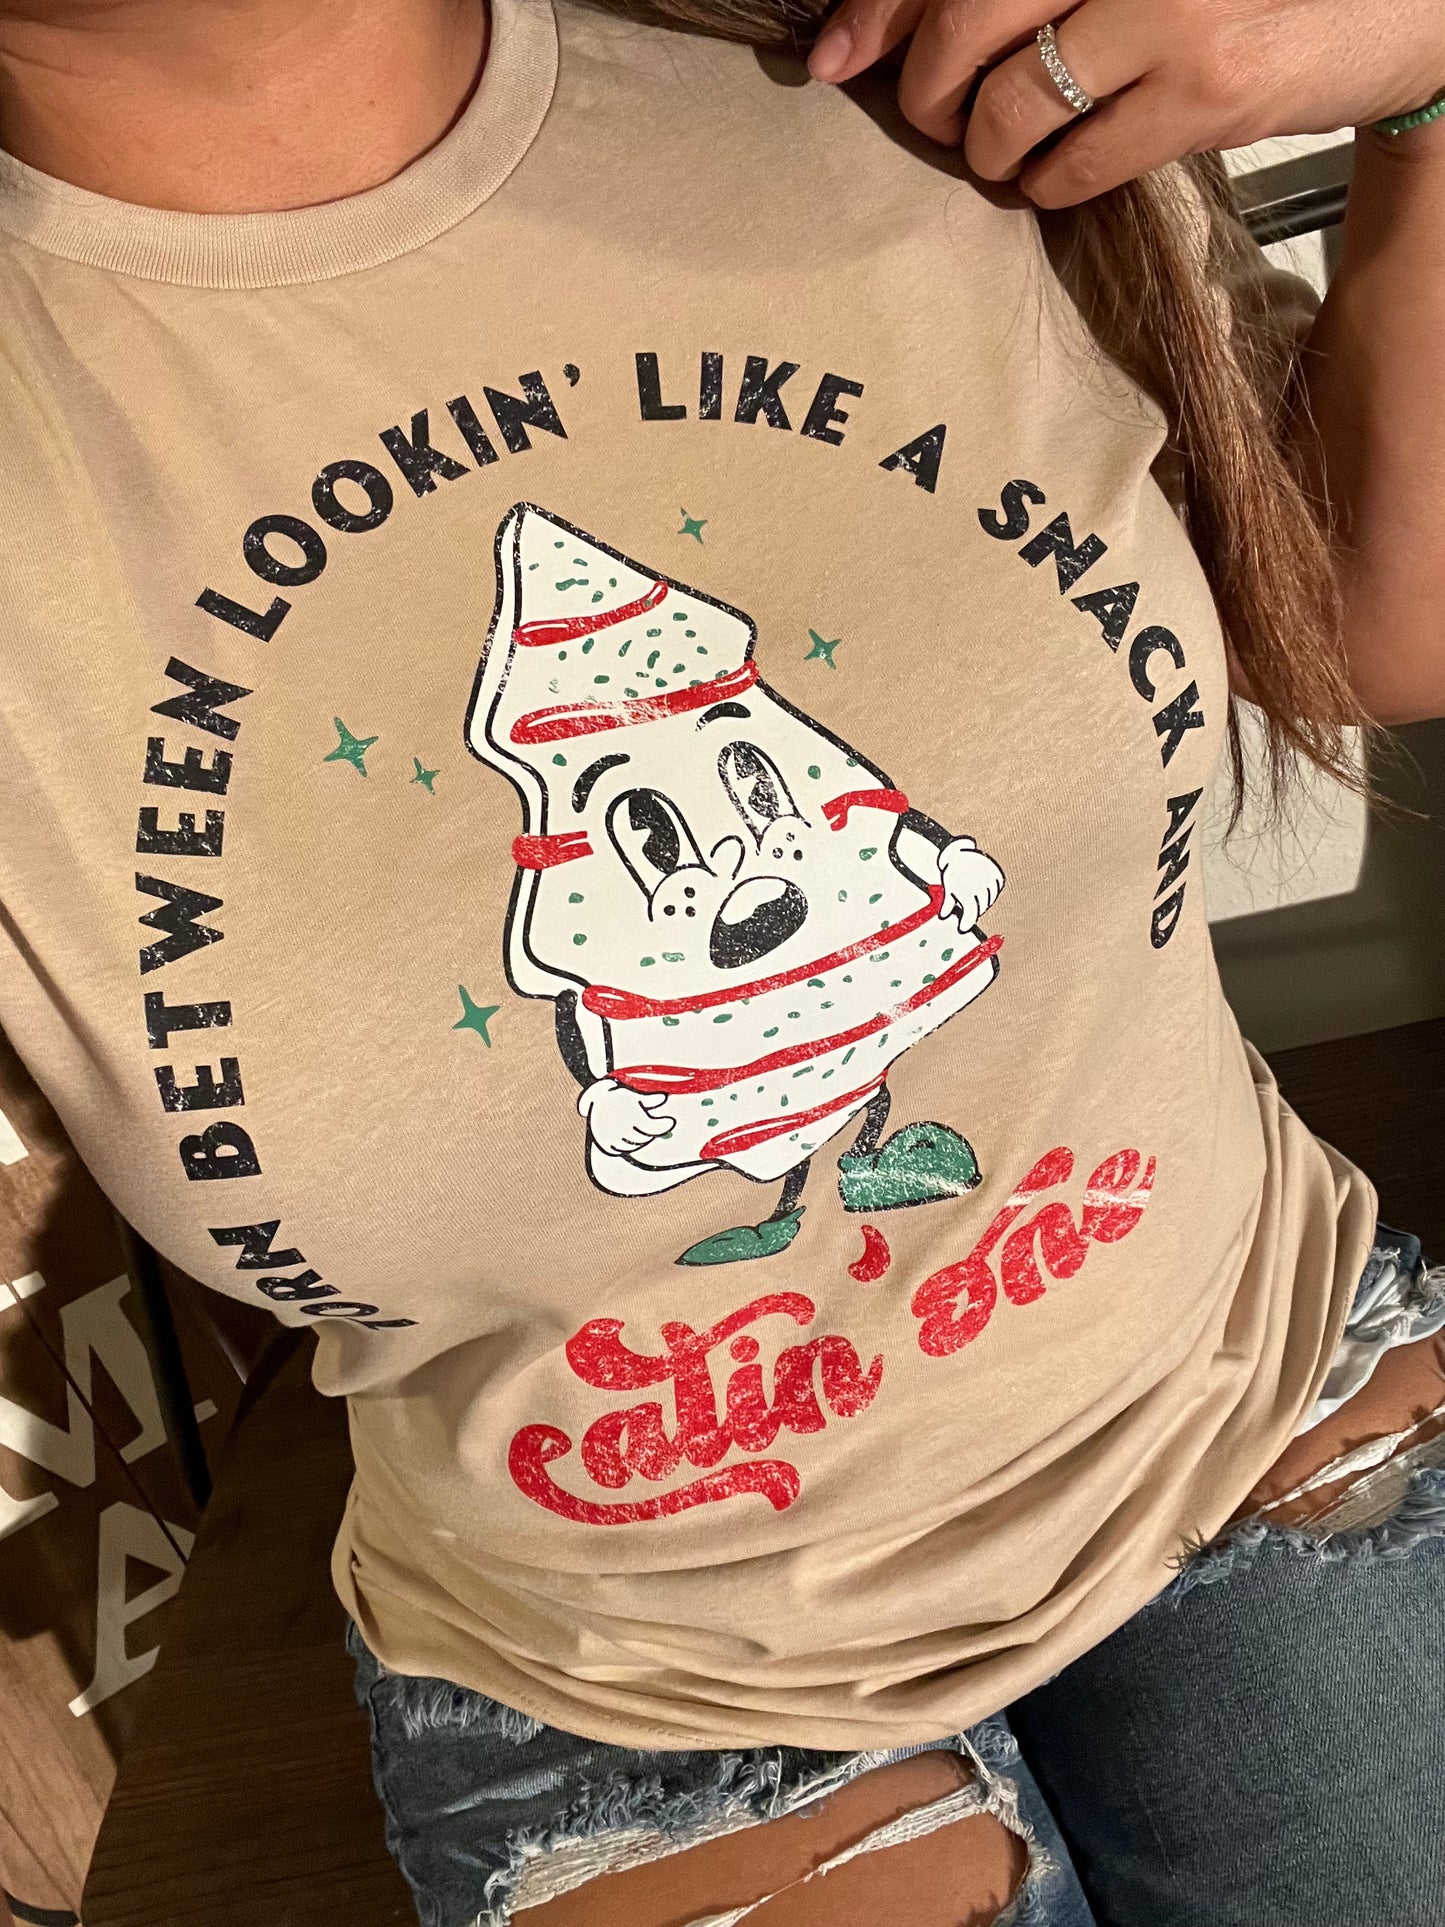 Torn between lookin’ like a snack Tee for Her or Transfer